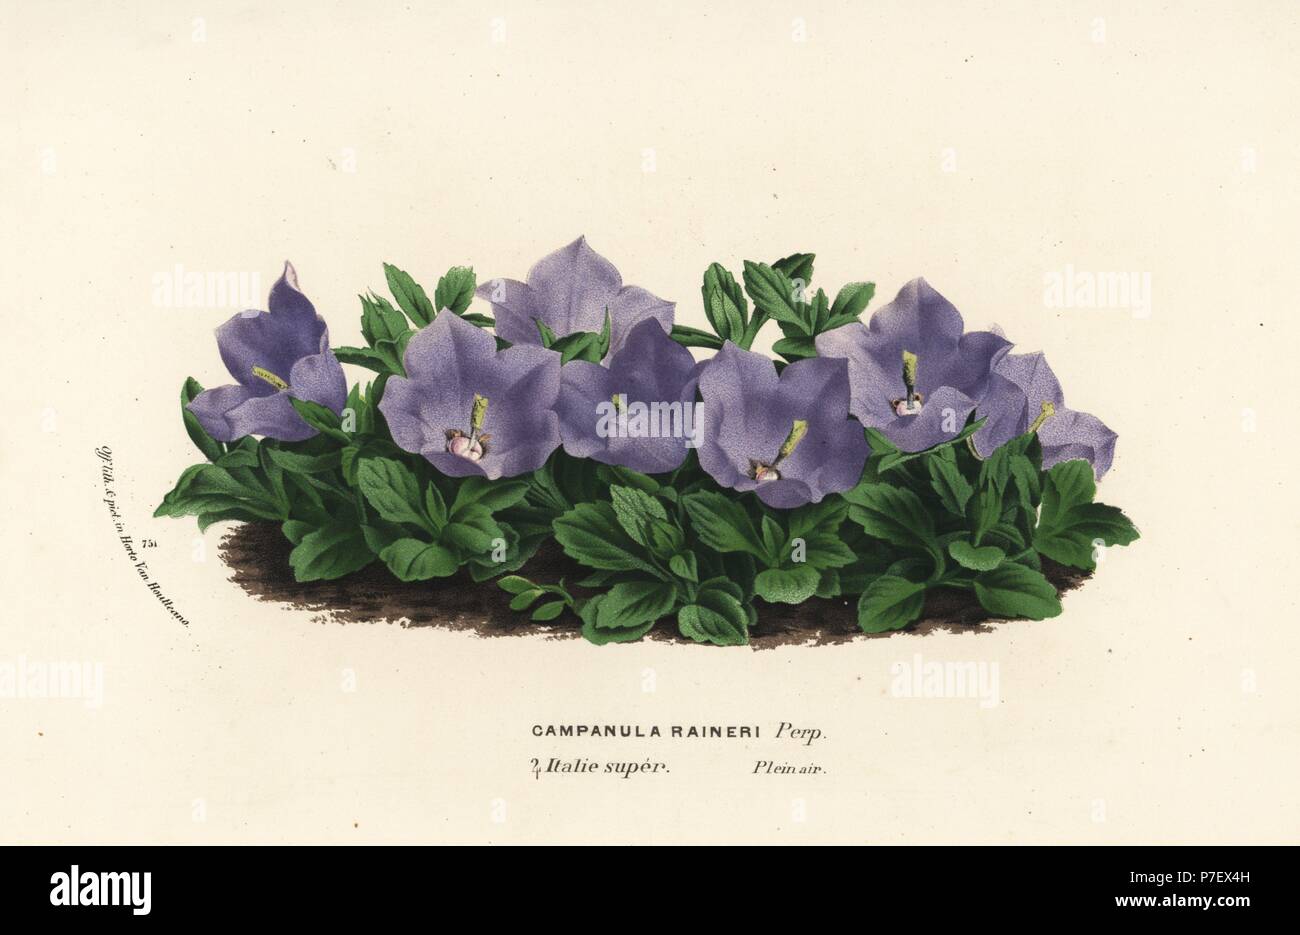 Rainer's bellflower, Campanula raineri. Handcoloured lithograph from Louis van Houtte and Charles Lemaire's Flowers of the Gardens and Hothouses of Europe, Flore des Serres et des Jardins de l'Europe, Ghent, Belgium, 1845. Stock Photo